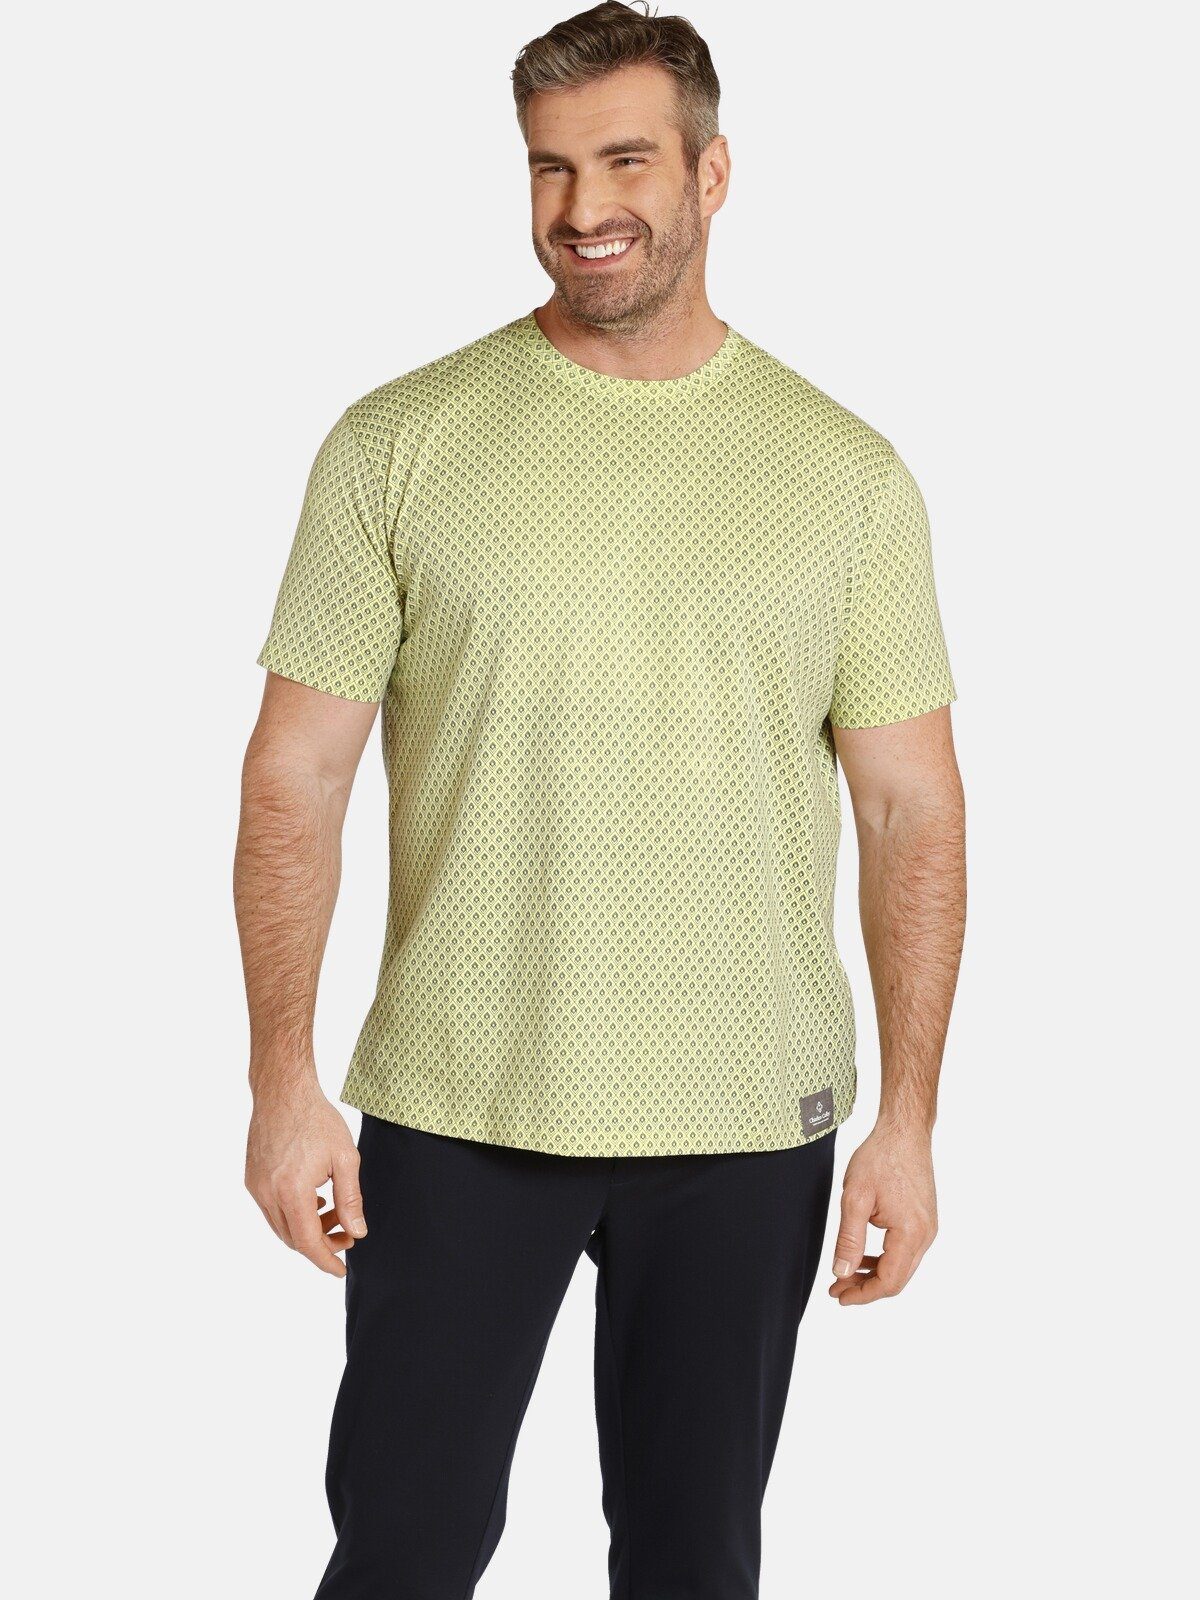 Colby Charles DYDDI EARL Fit im Comfort All-Over-Print, T-Shirt